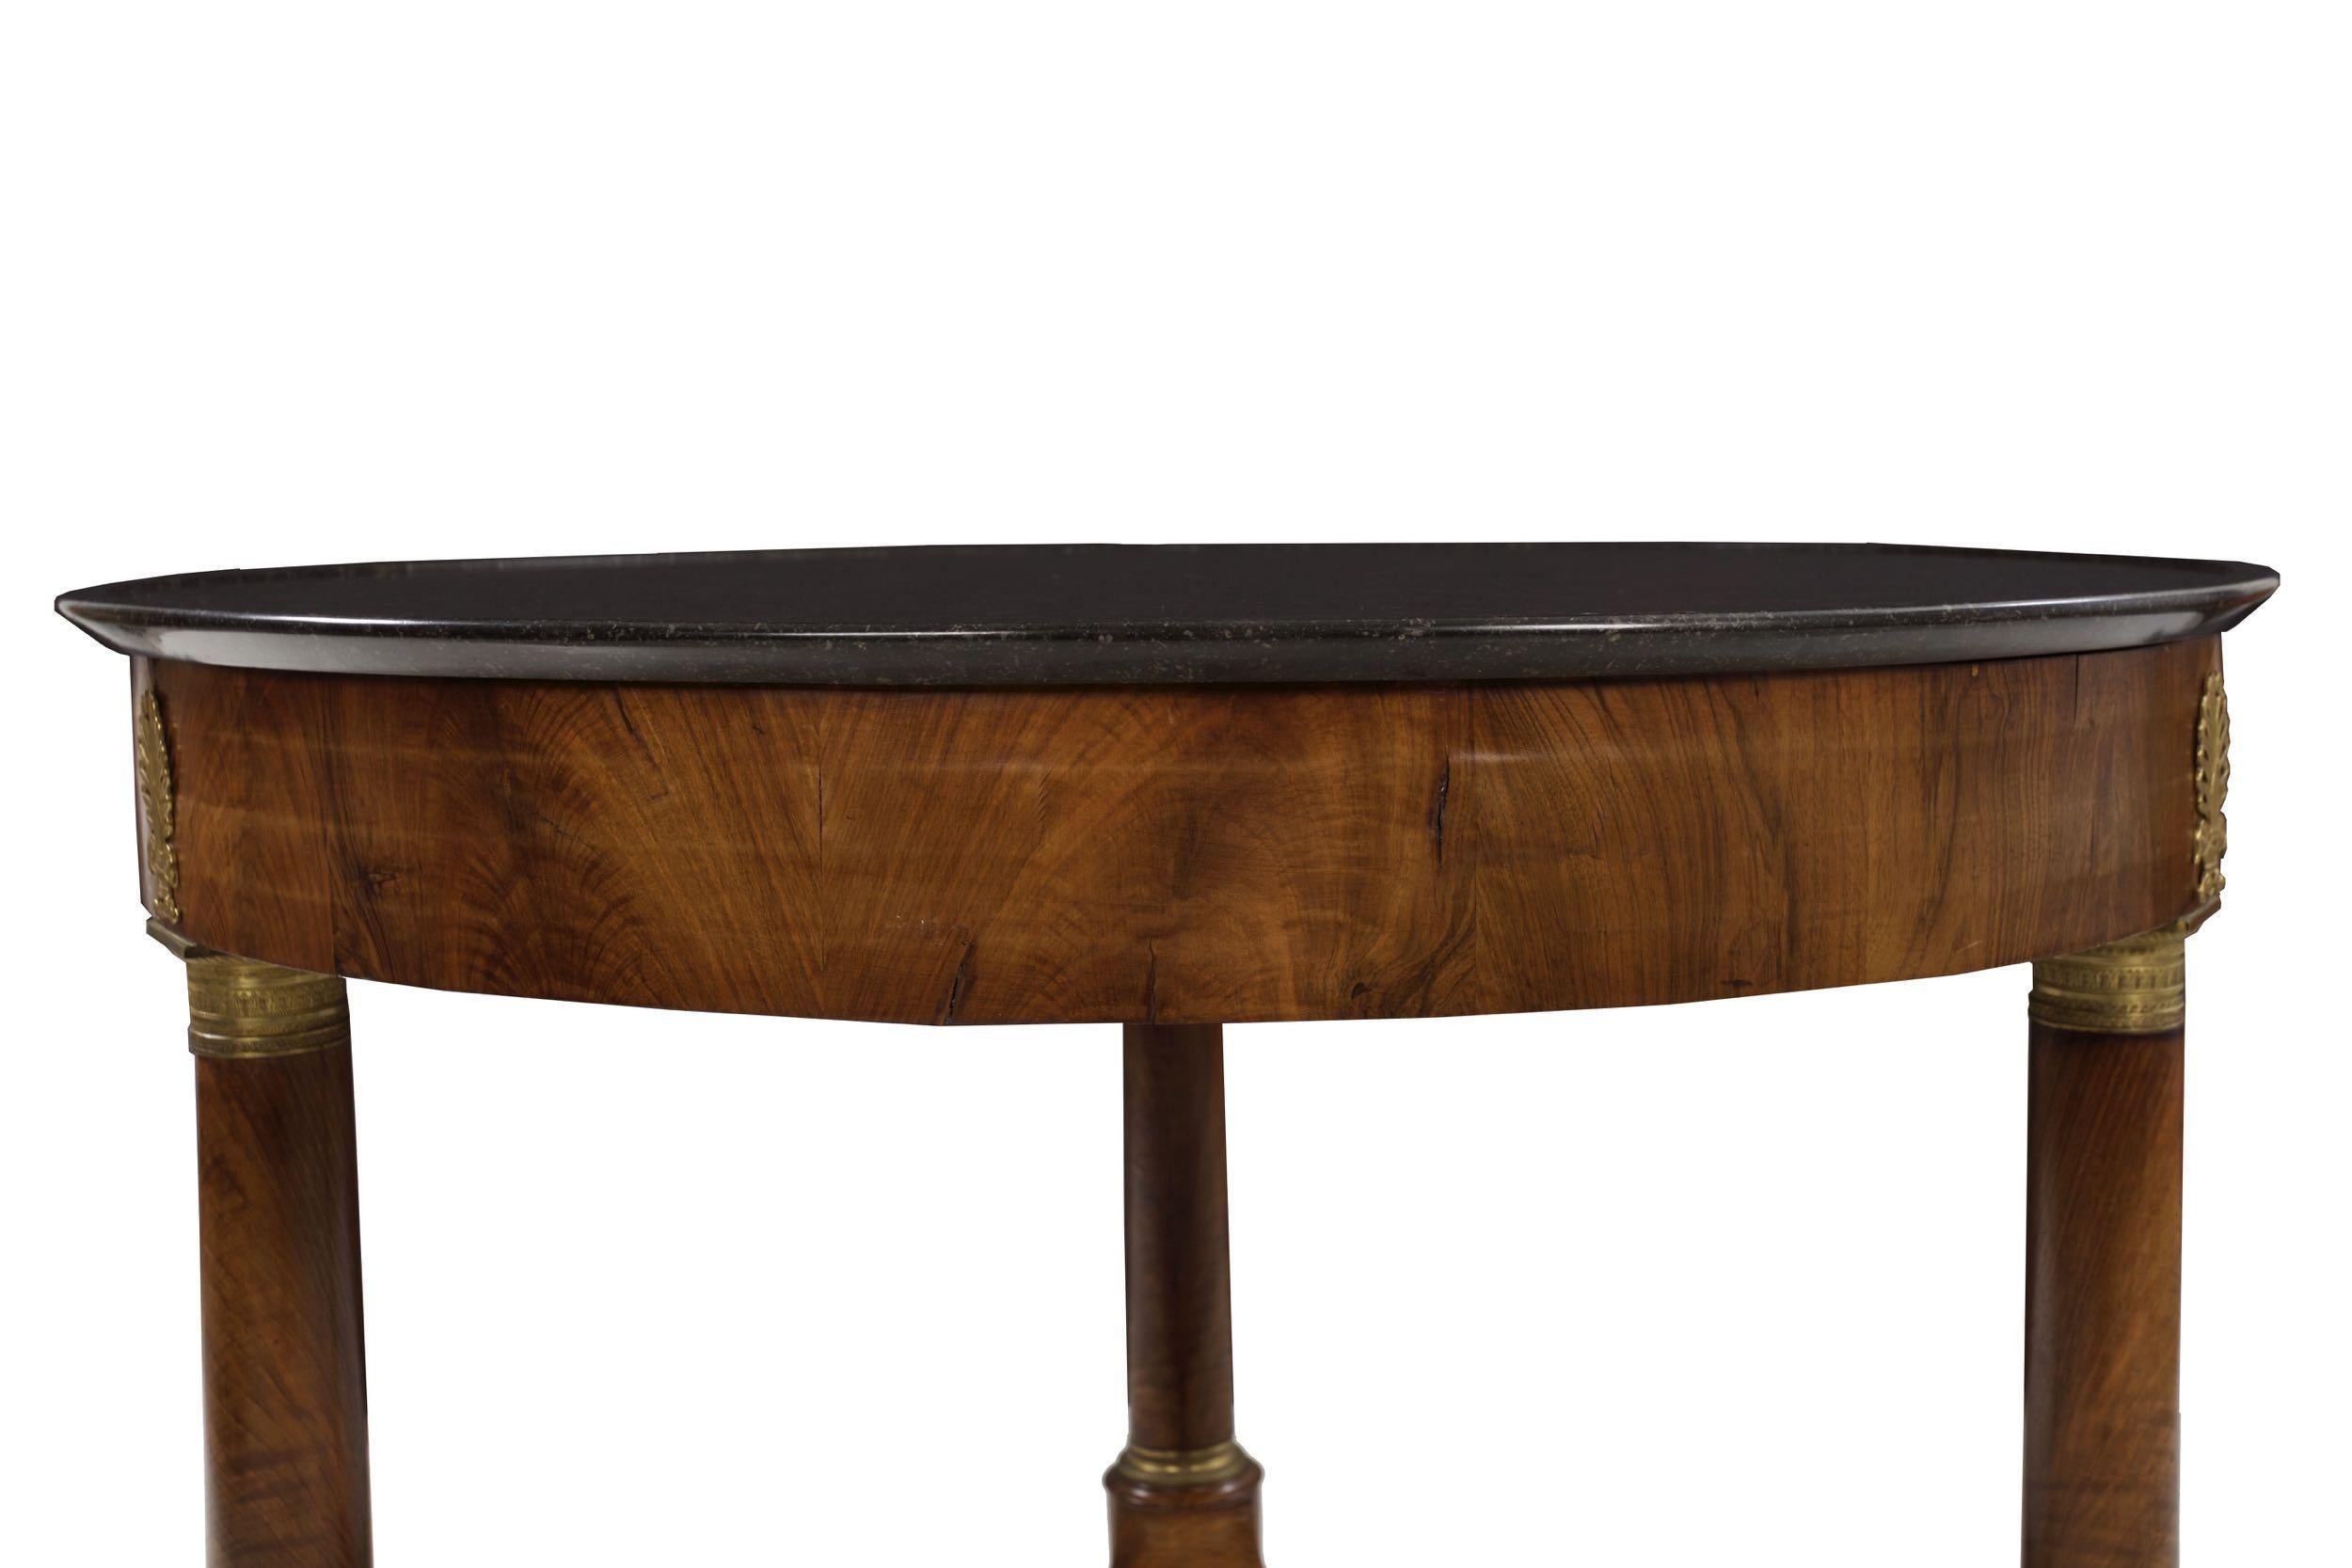 French Empire Antique Burl Walnut Center Table with Black Marble Top, circa 1815 For Sale 12